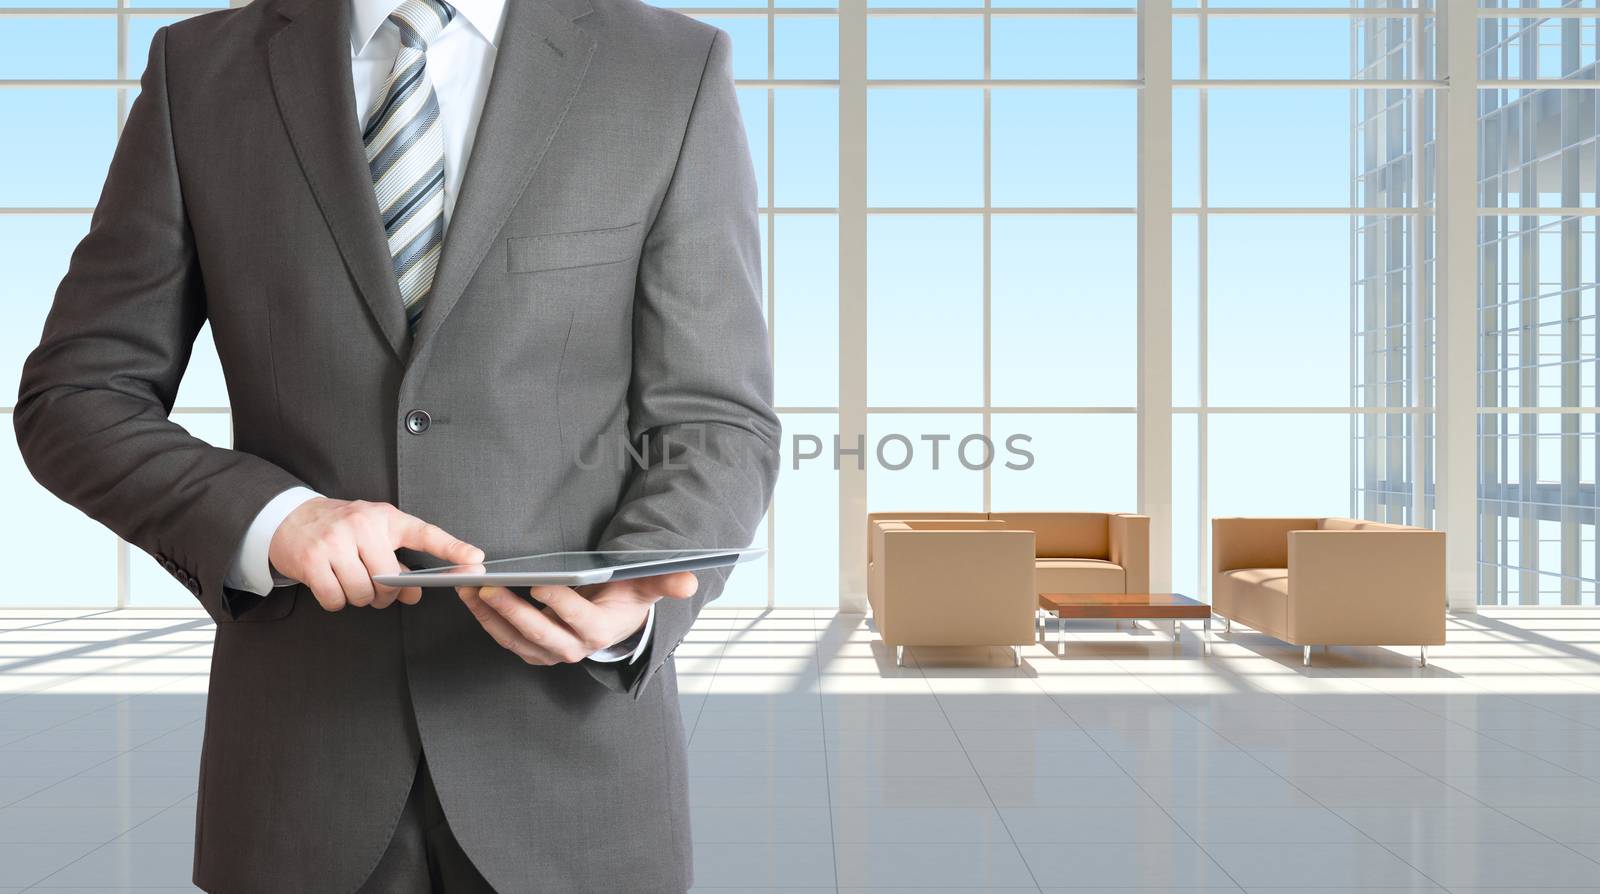 Businessman holding tablet pc. Large window in office building as background